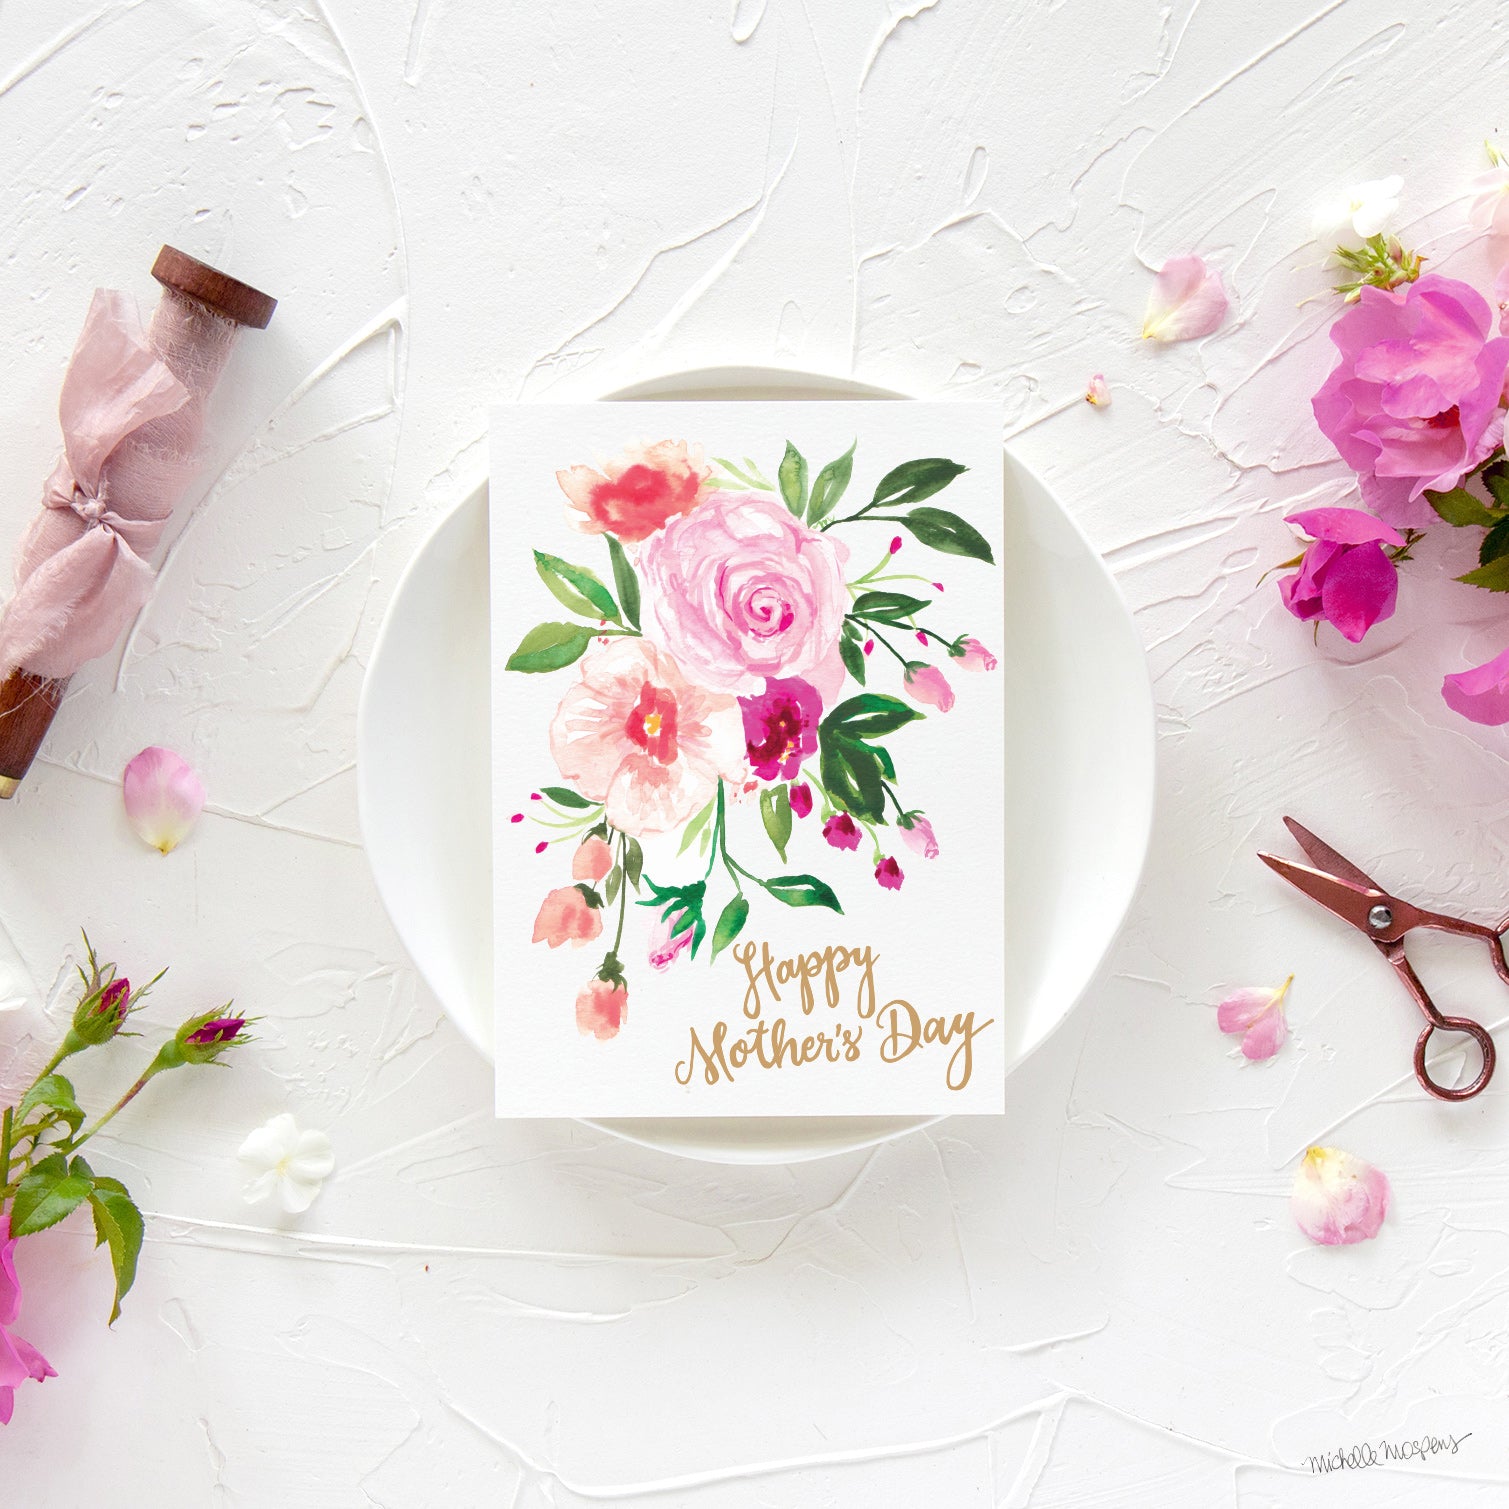 Pink Posy Mother's Day Card by Michelle Mospens